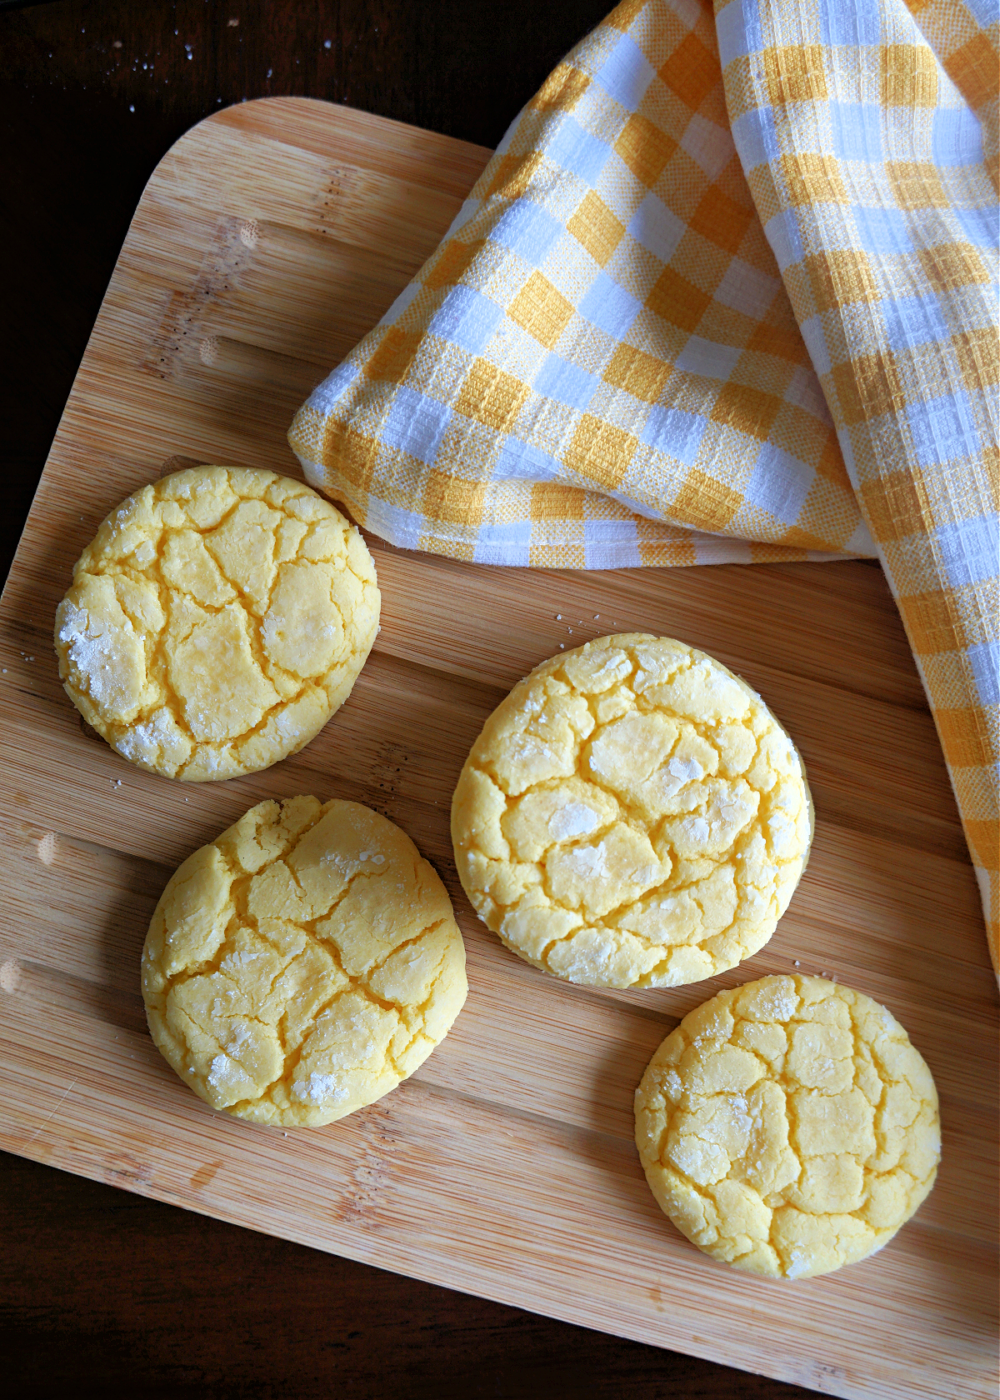 lemon ookies with powdered sugar on top on a wooden cutting board with a yellow and white tea towel